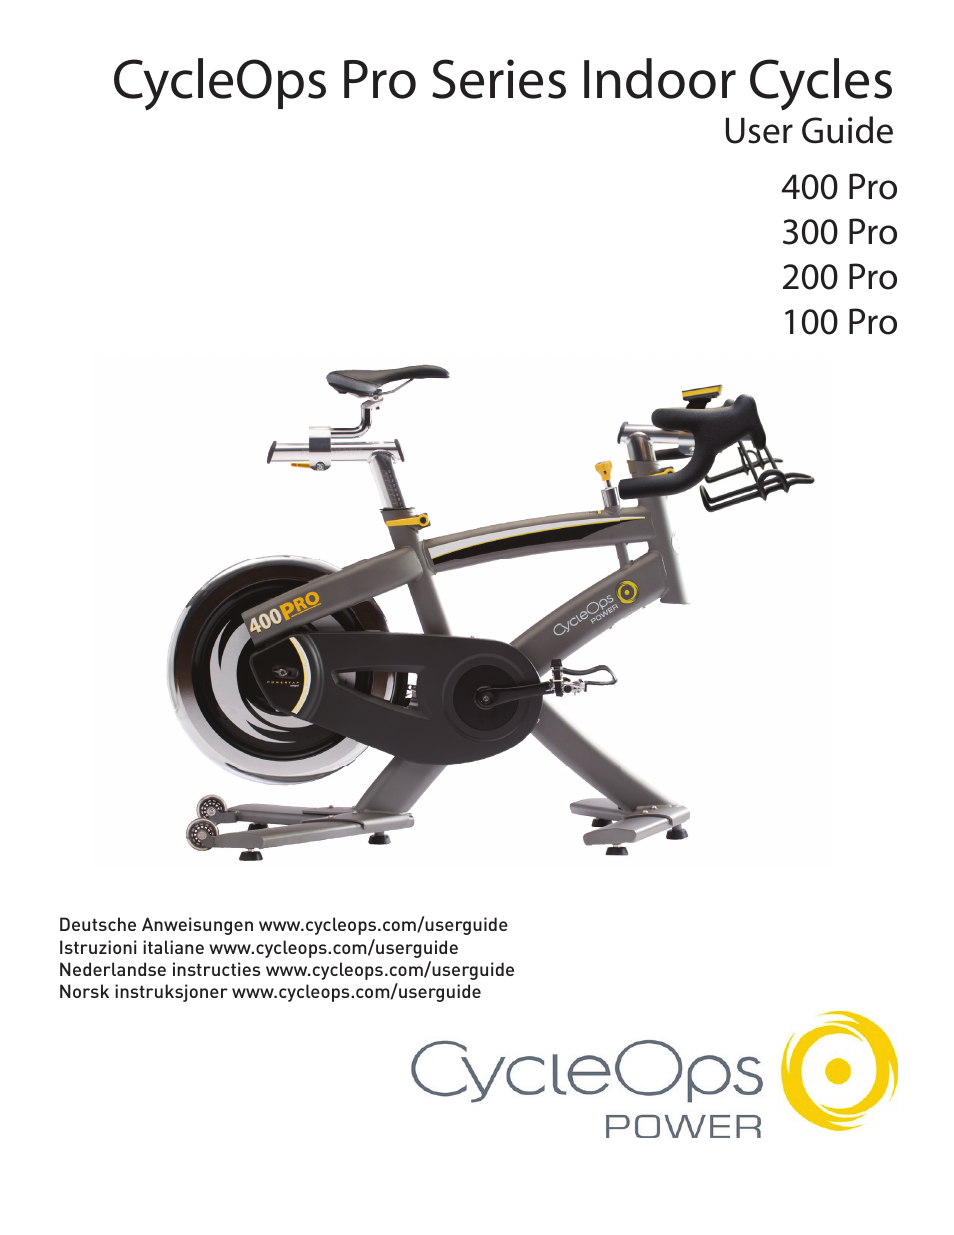 CycleOps 300 PRO User Manual | 15 pages | Also for: 100 PRO, 200 PRO, 400 PRO